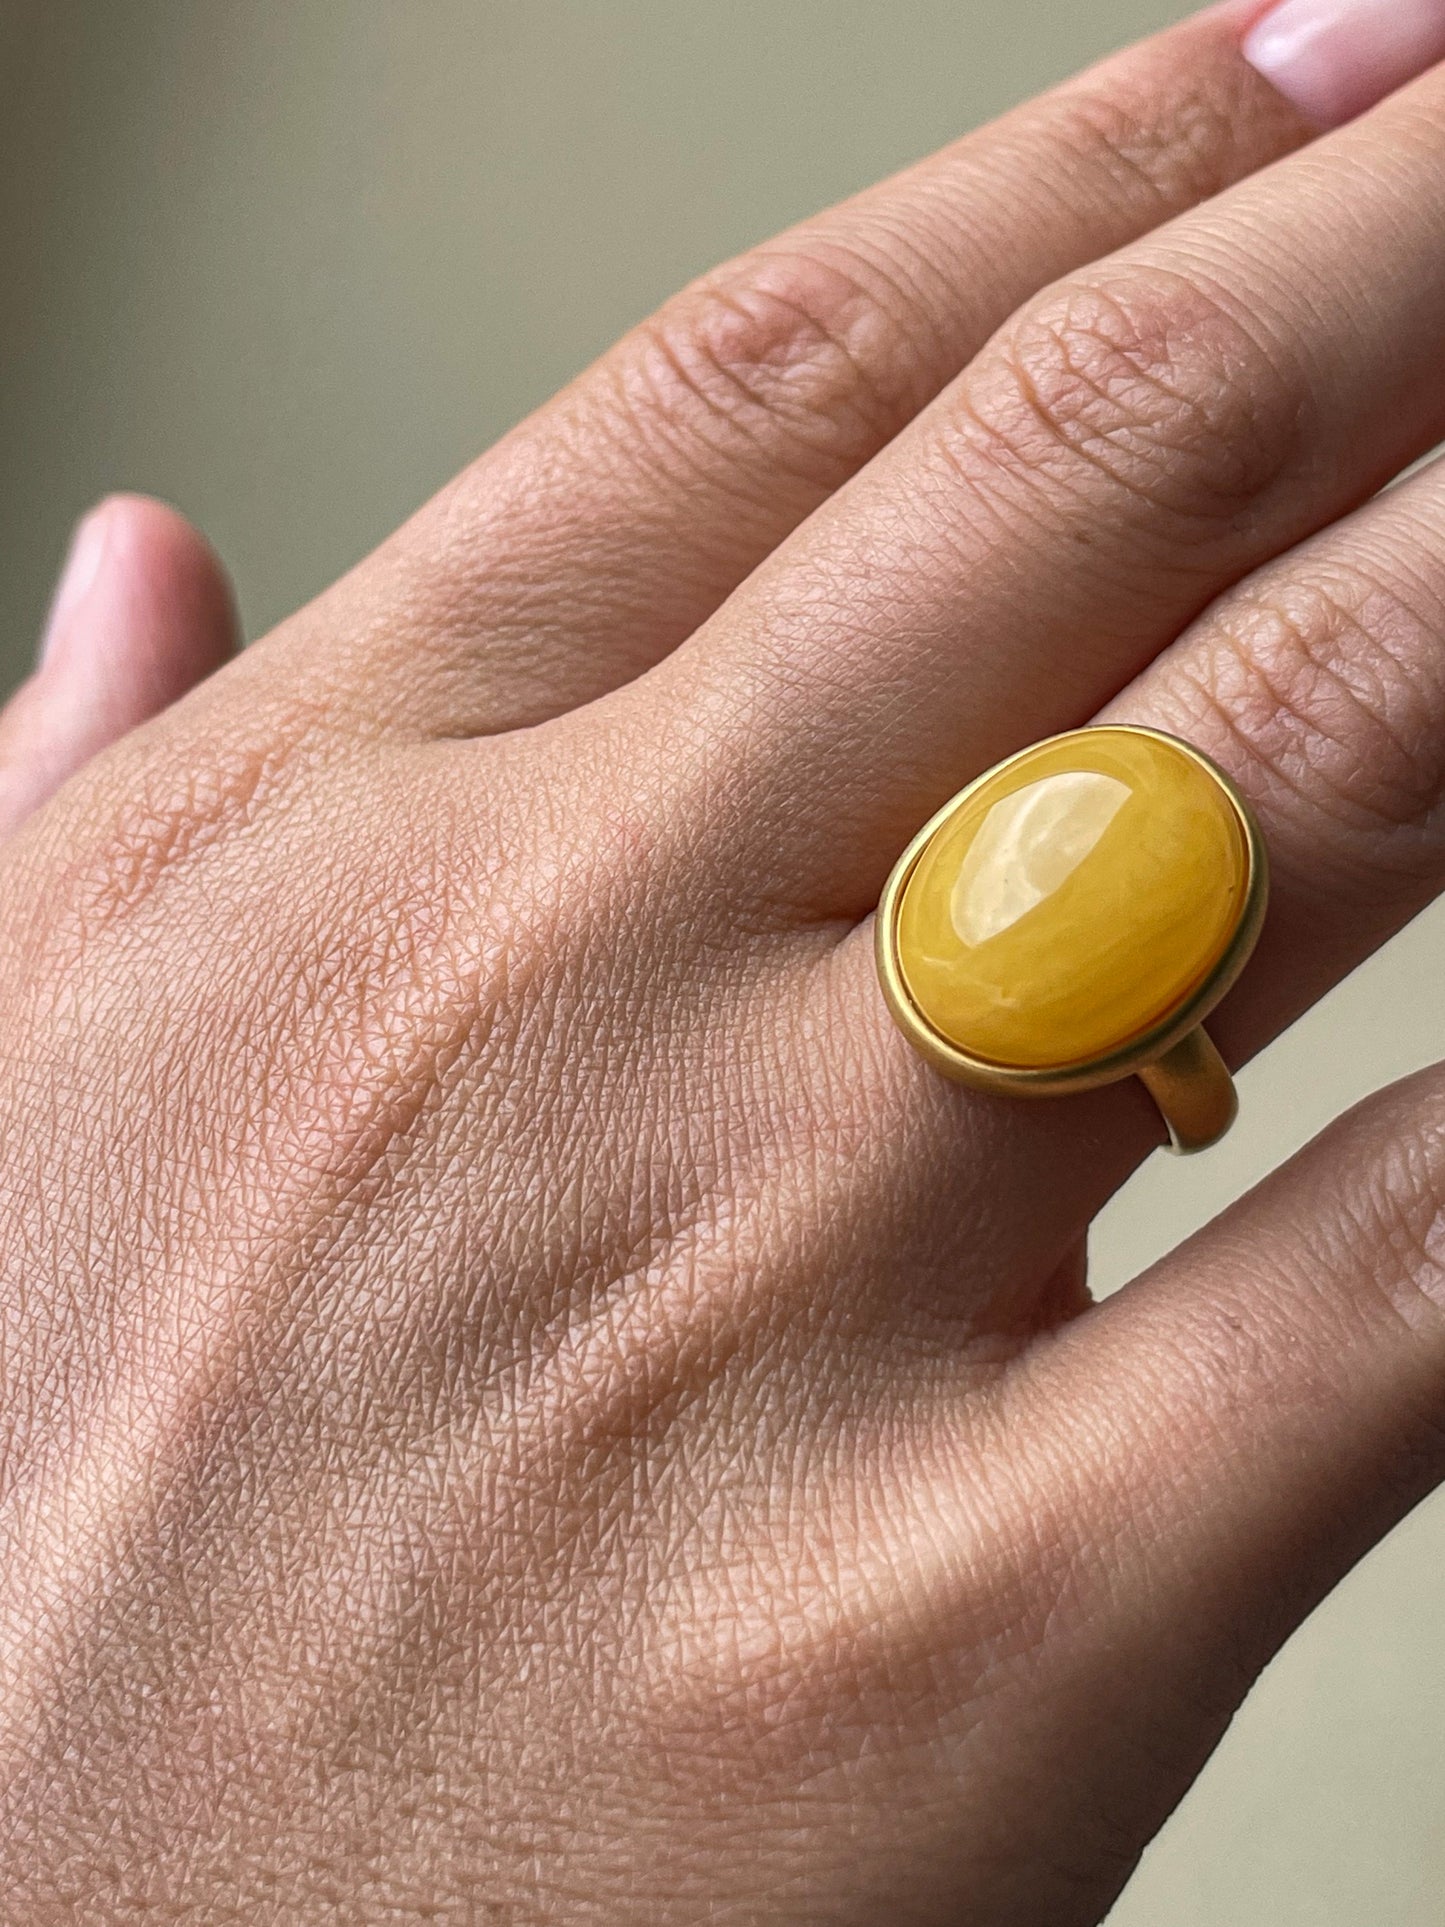 Butterscotch amber ring - Gold plated silver - Large ring collection